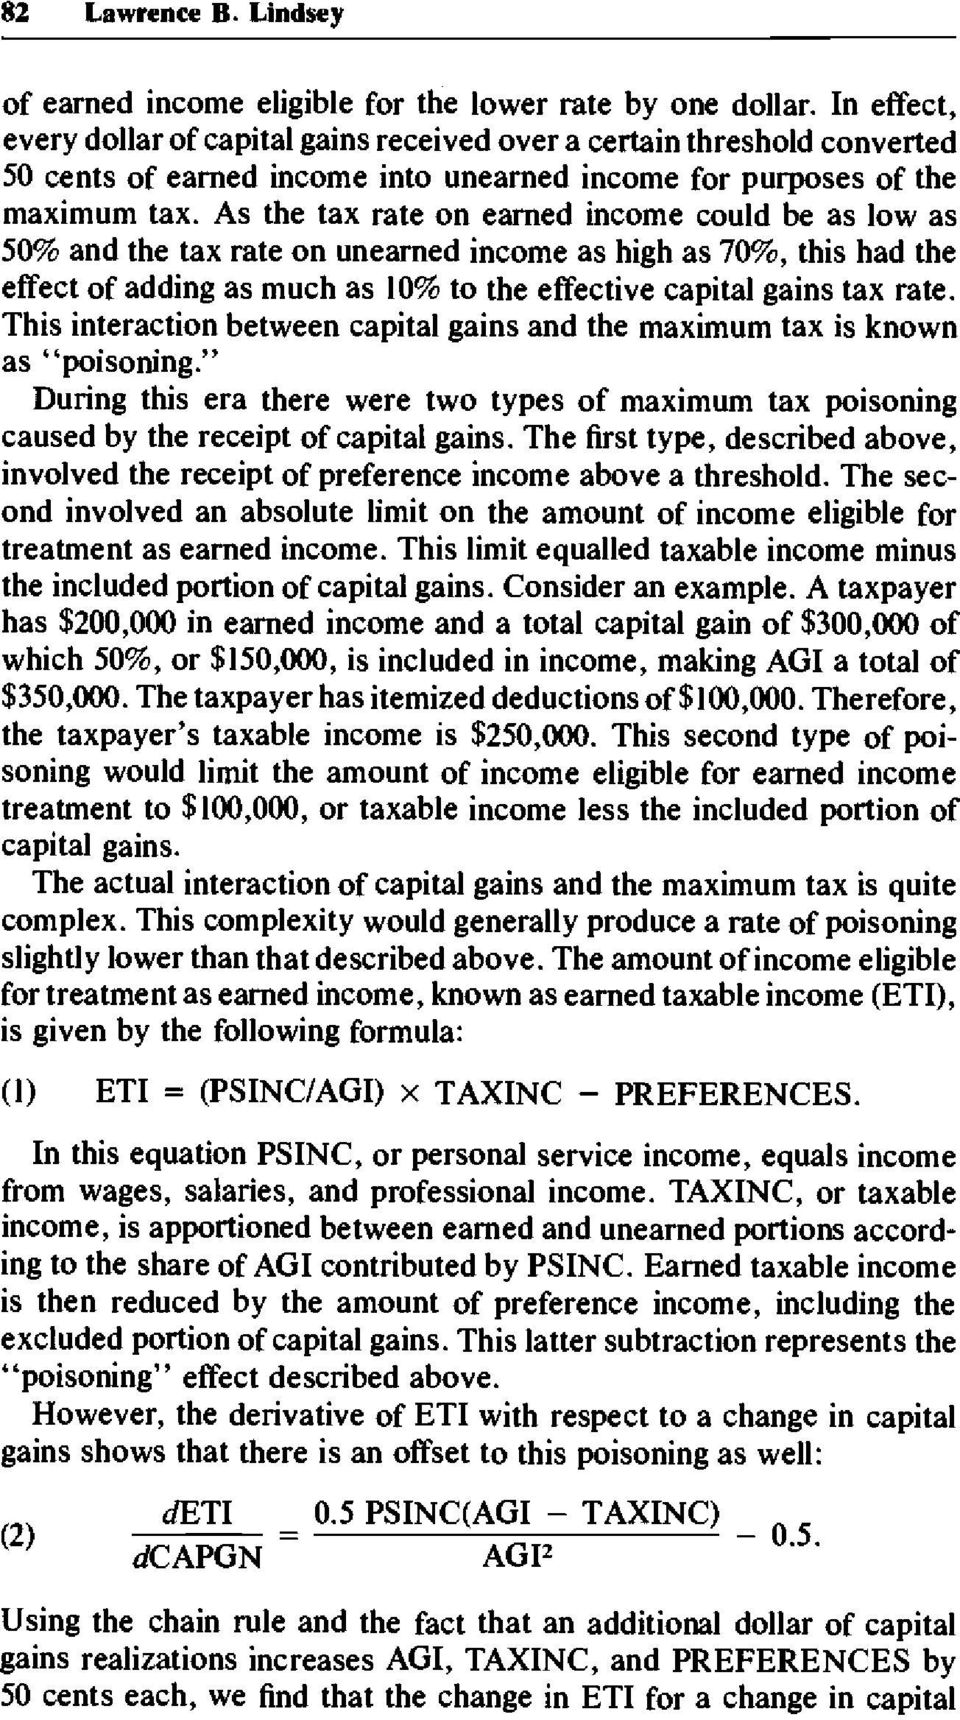 As the tax rate on earned income could be as low as 50% and the tax rate on unearned income as high as 70%, this had the effect of adding as much as 10% to the effective capital gains tax rate.